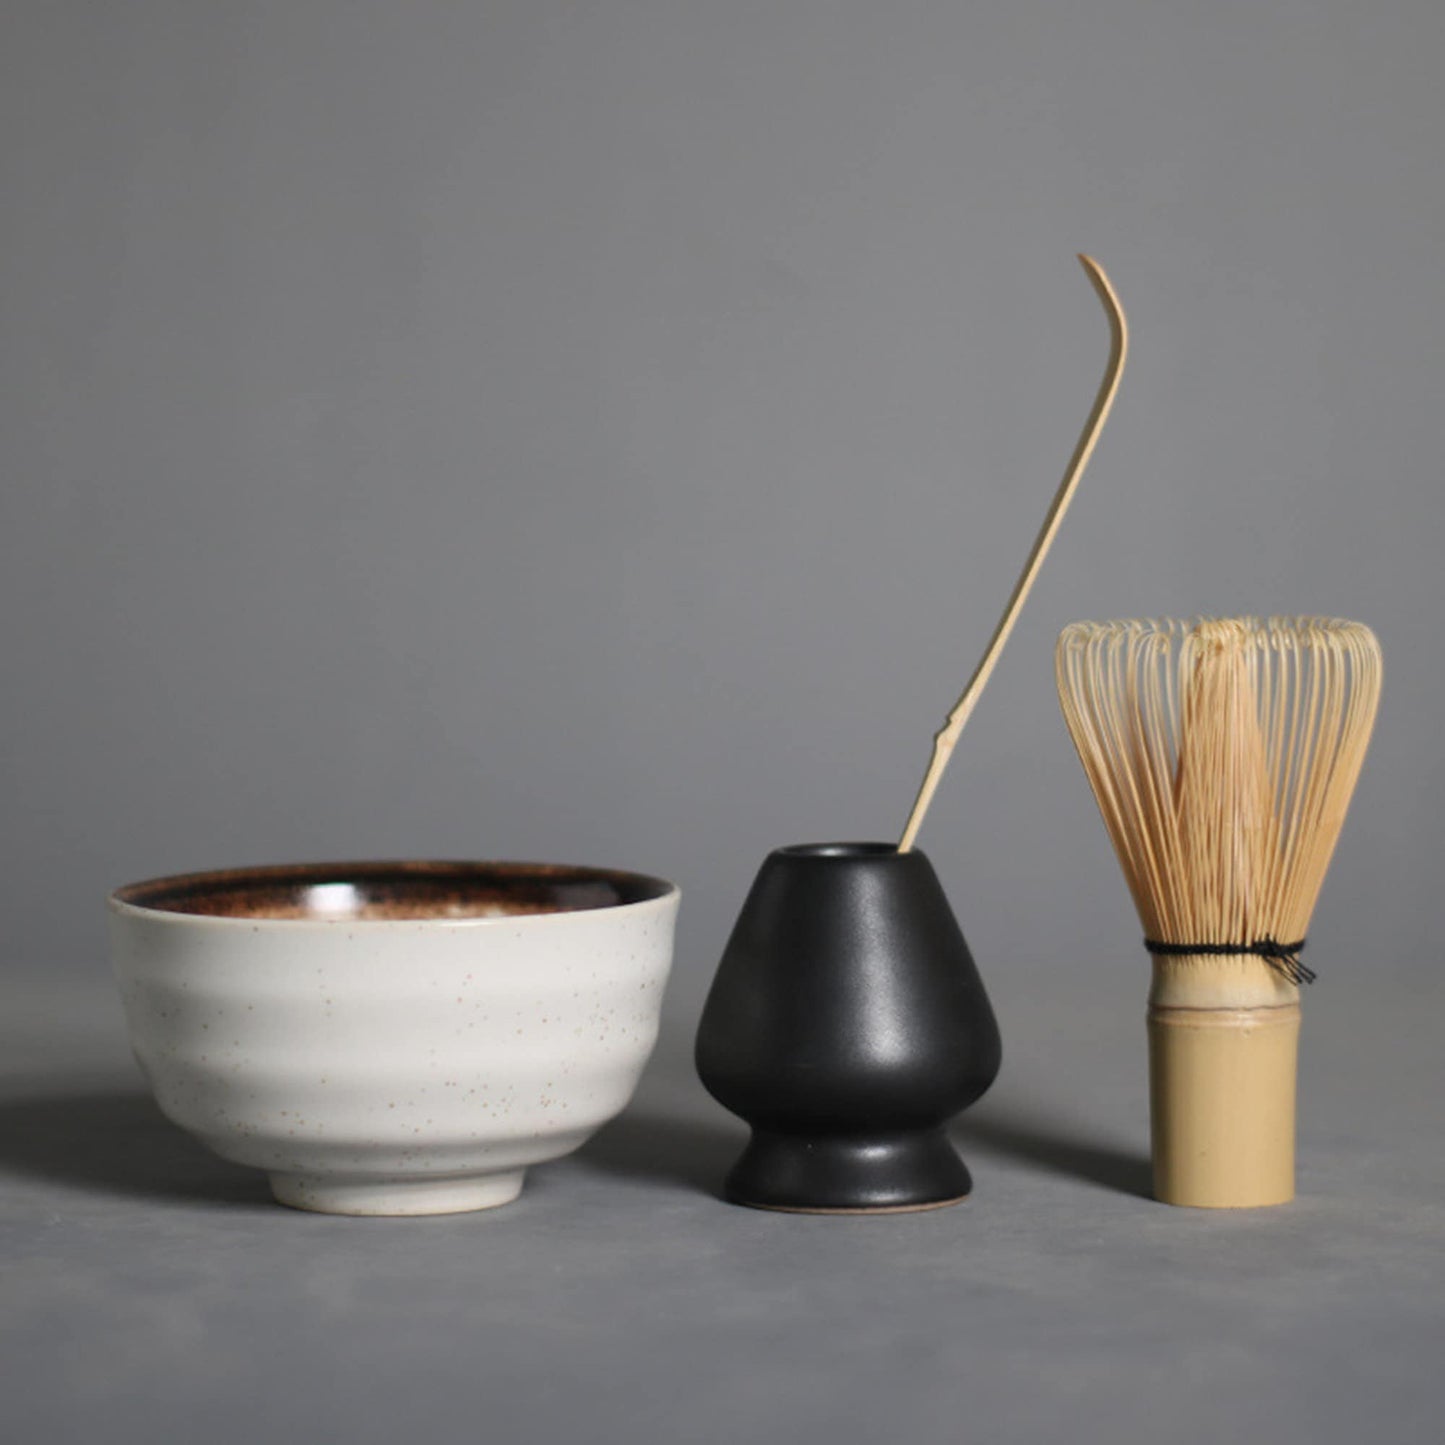 Japanese Ceramic Matcha Bowl and Whisk Sets-Matcha Kit With Bamboo Whisk and Holder -Tea Ceremony Set-Tea accessories